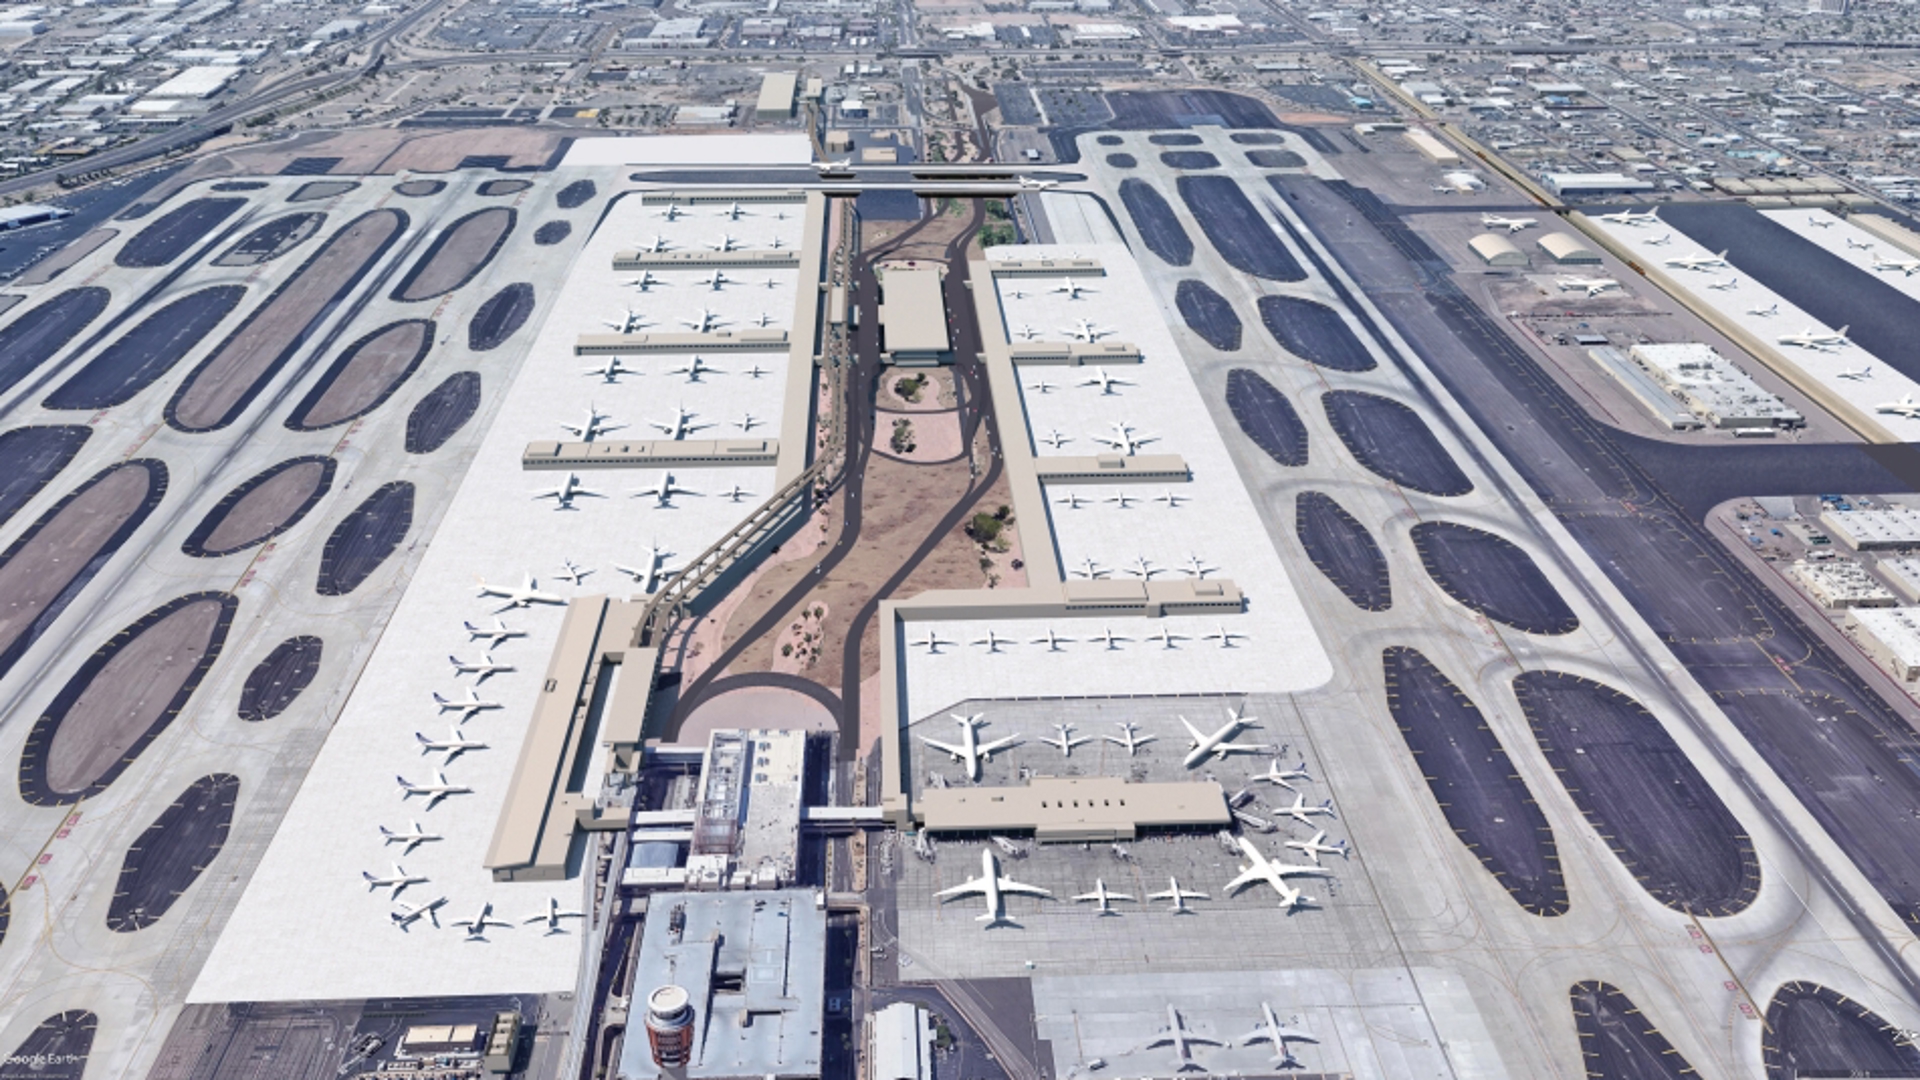 Here's what we know about the proposed new terminal at Sky Harbor.